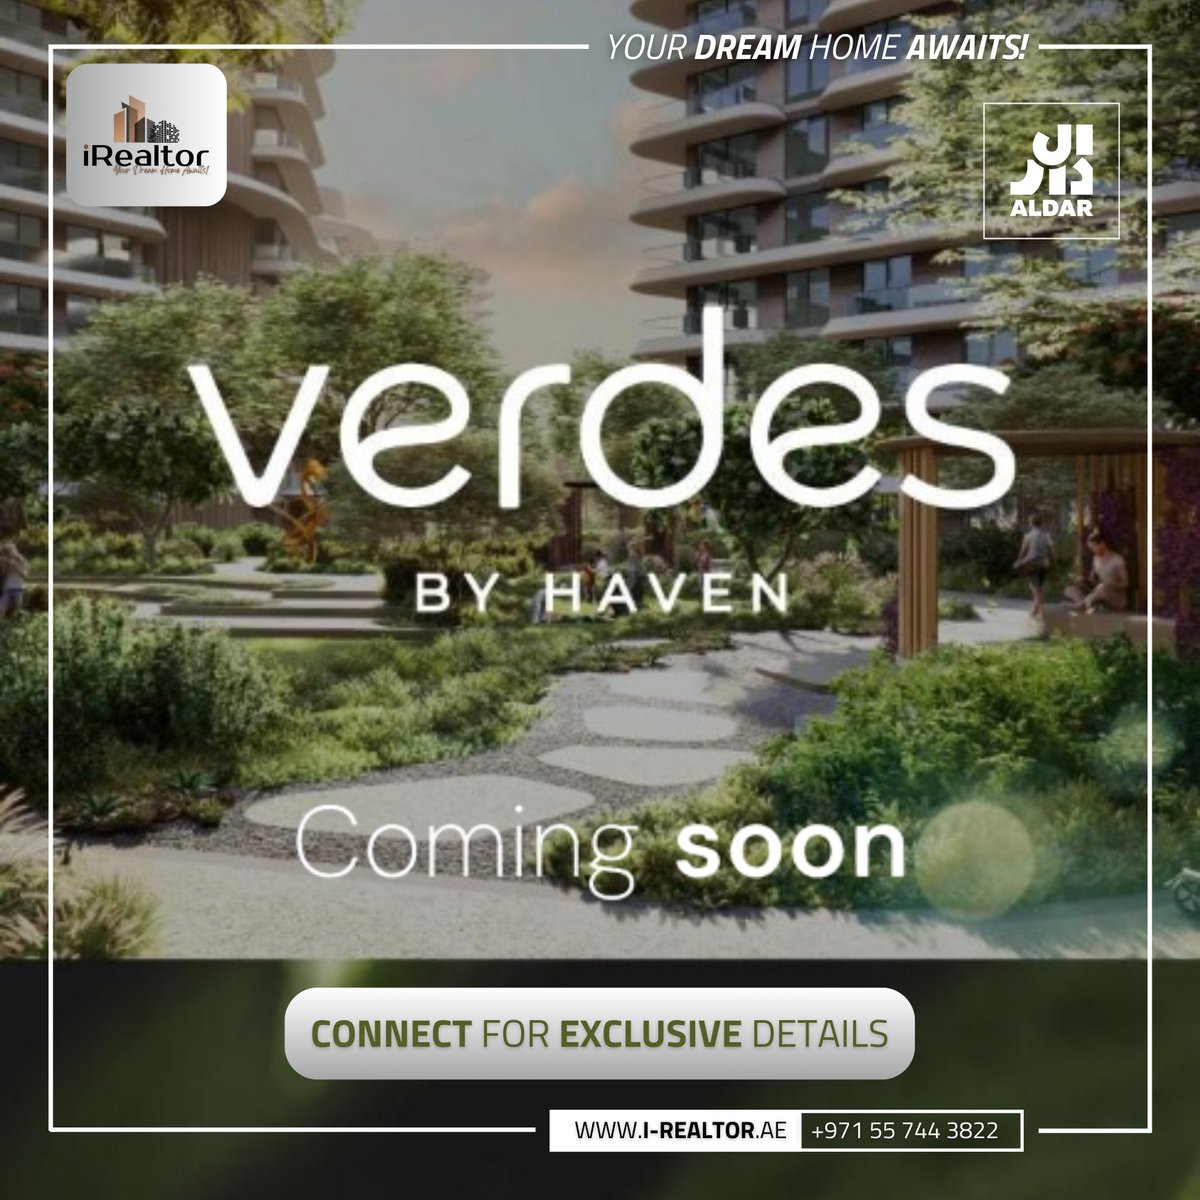 Get ready for another exciting investment opportunity. Weather you choose to live in it or planning to invest in property, VERDES by Haven is Coming Soon!
#verdesbyhaven #wellnessliving #aldar #buyproperties #luxuryapartments #luxuryproperties #qualityliving #investinproperty